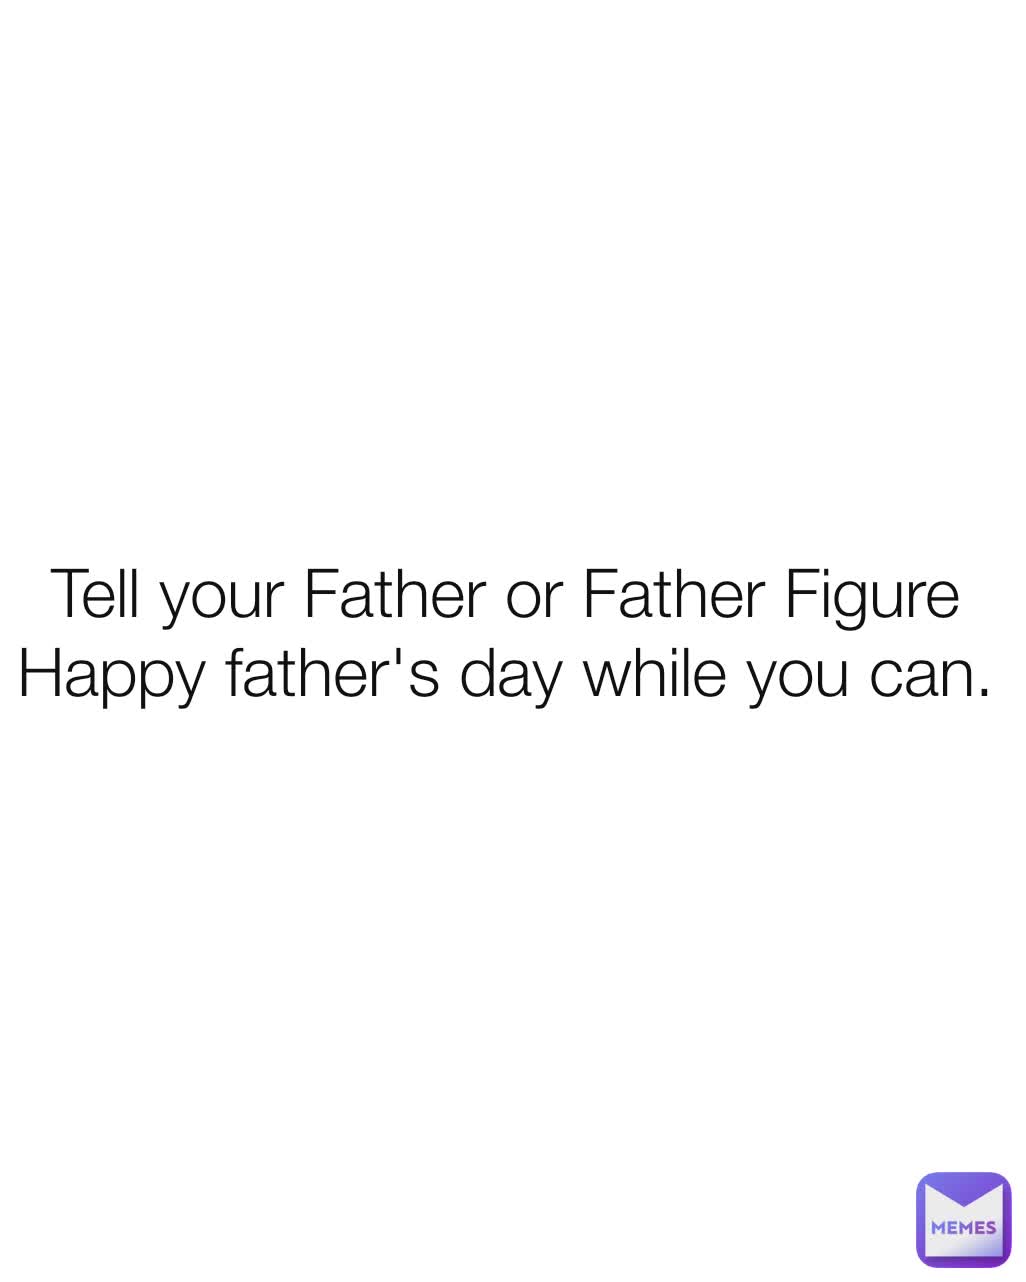 Tell your Father or Father Figure Happy father's day while you can.